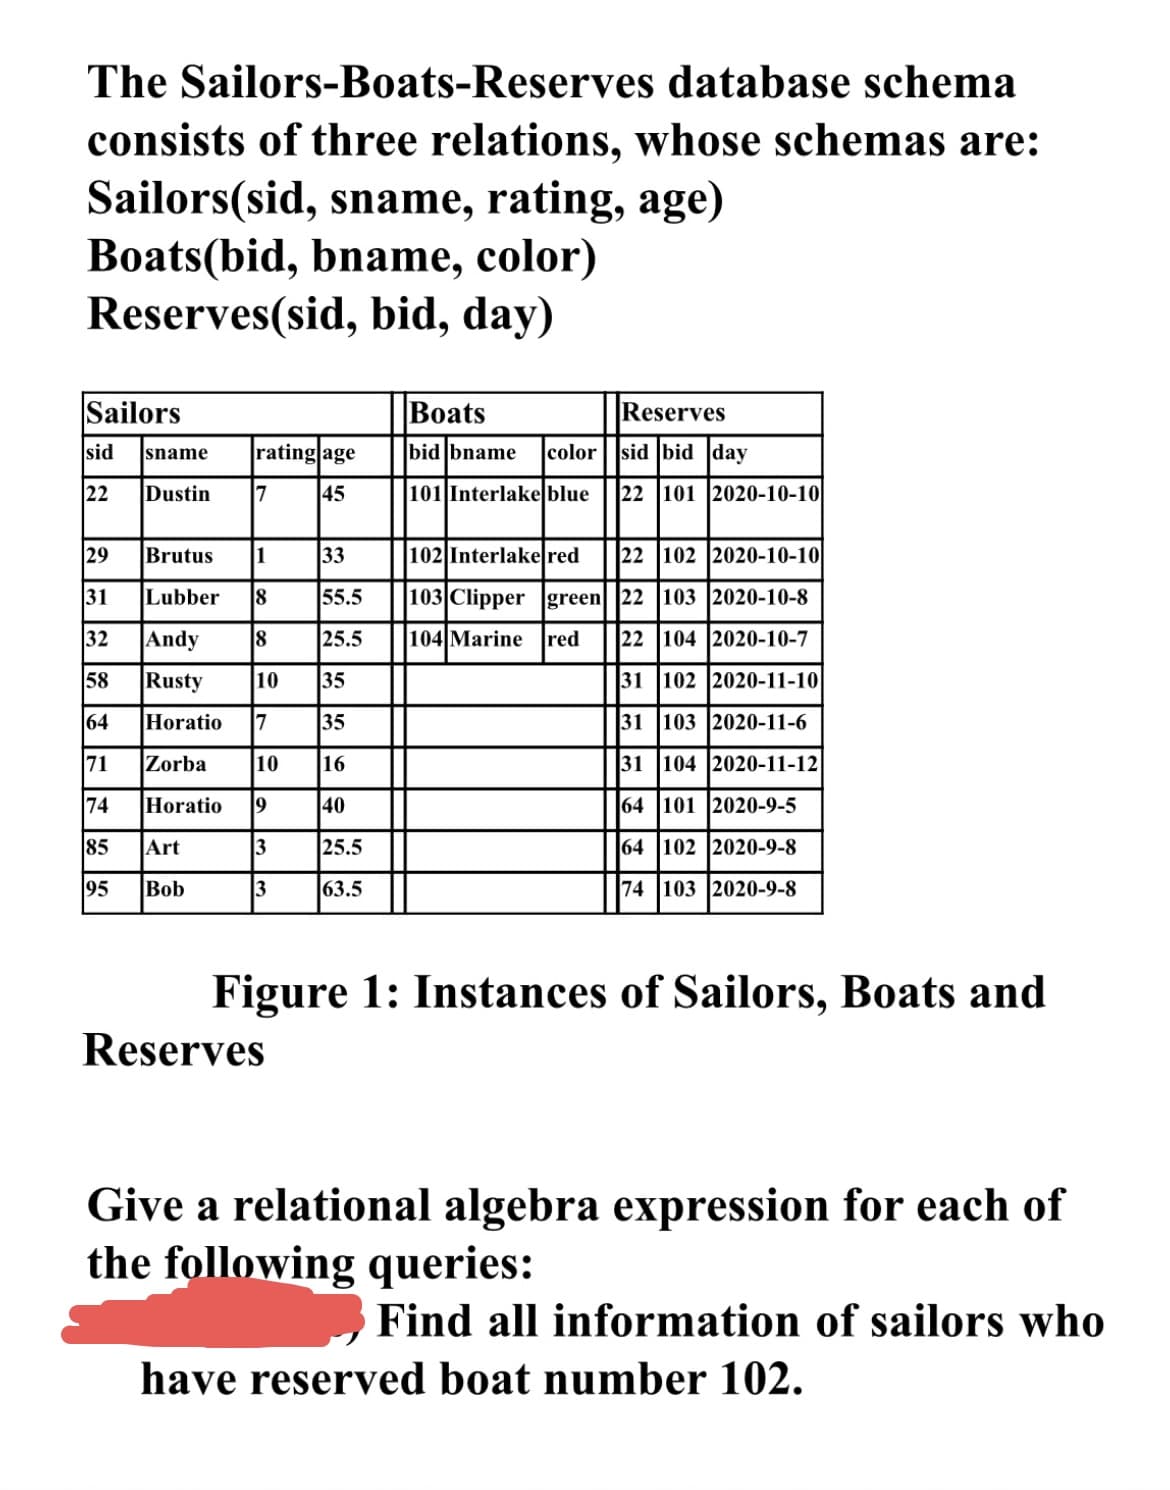 The Sailors-Boats-Reserves database schema
consists of three relations, whose schemas are:
Sailors(sid, sname, rating, age)
Boats(bid, bname, color)
Reserves(sid, bid, day)
Sailors
Вoats
Reserves
sid
sname
rating age
bid bname
color
sid bid day
22
Dustin
7
45
|101 Interlake blue
22 |101 2020-10-10
29
Brutus
1
33
102 Interlake red
22 102 2020-10-10
31
Lubber
8
55.5
|103 Clipper Igreen 22 103 2020-10-8
32
Andy
25.5
104 Marine
red
22 104 2020-10-7
58
Rusty
10
35
31 102 2020-11-10
64
Horatio
7
35
31 103 2020-11-6
71
Zorba
10
16
31 104 2020-11-12
74
Horatio
9
40
64 101 2020-9-5
85
Art
3
25.5
64 102 2020-9-8
95
Bob
63.5
74 103 2020-9-8
Figure 1: Instances of Sailors, Boats and
Reserves
Give a relational algebra expression for each of
the following queries:
Find all information of sailors who
have reserved boat number 102.
